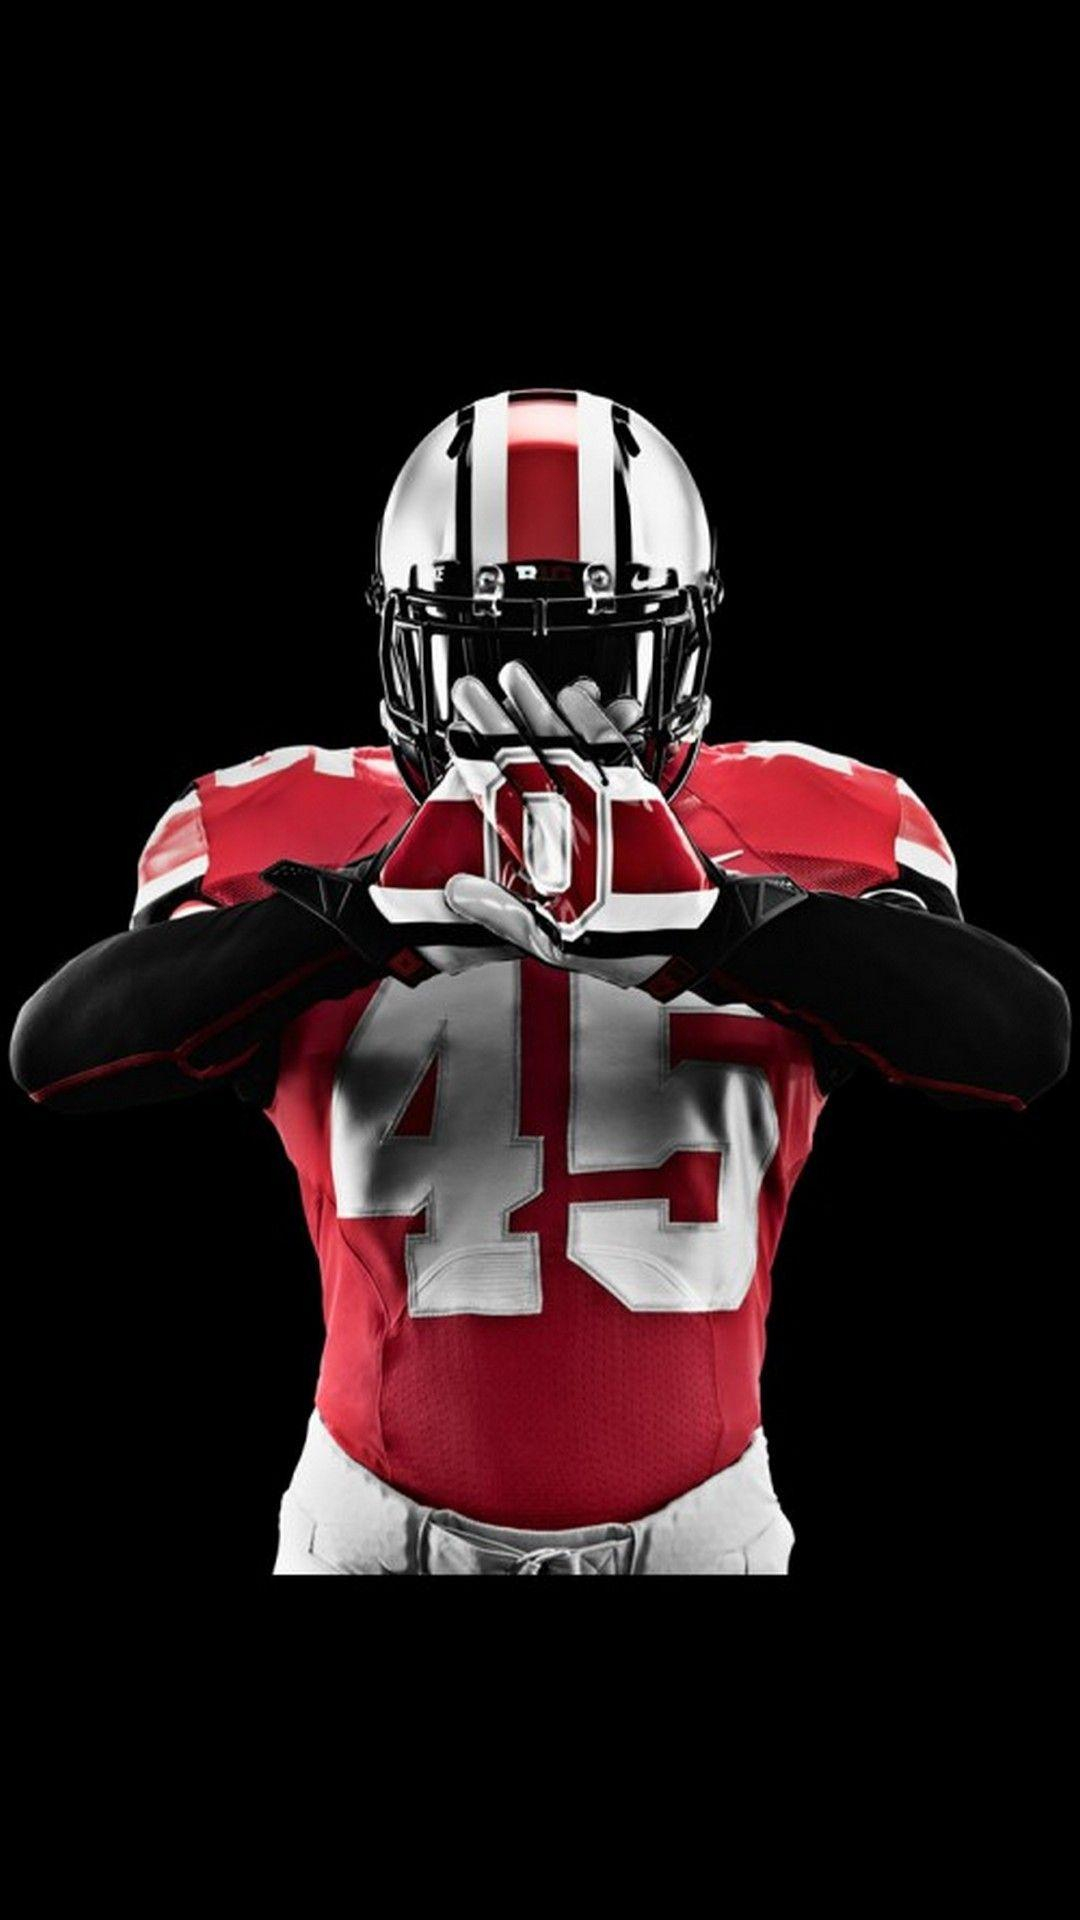 1080x1920 Ohio State Football Iphone Wallpapers